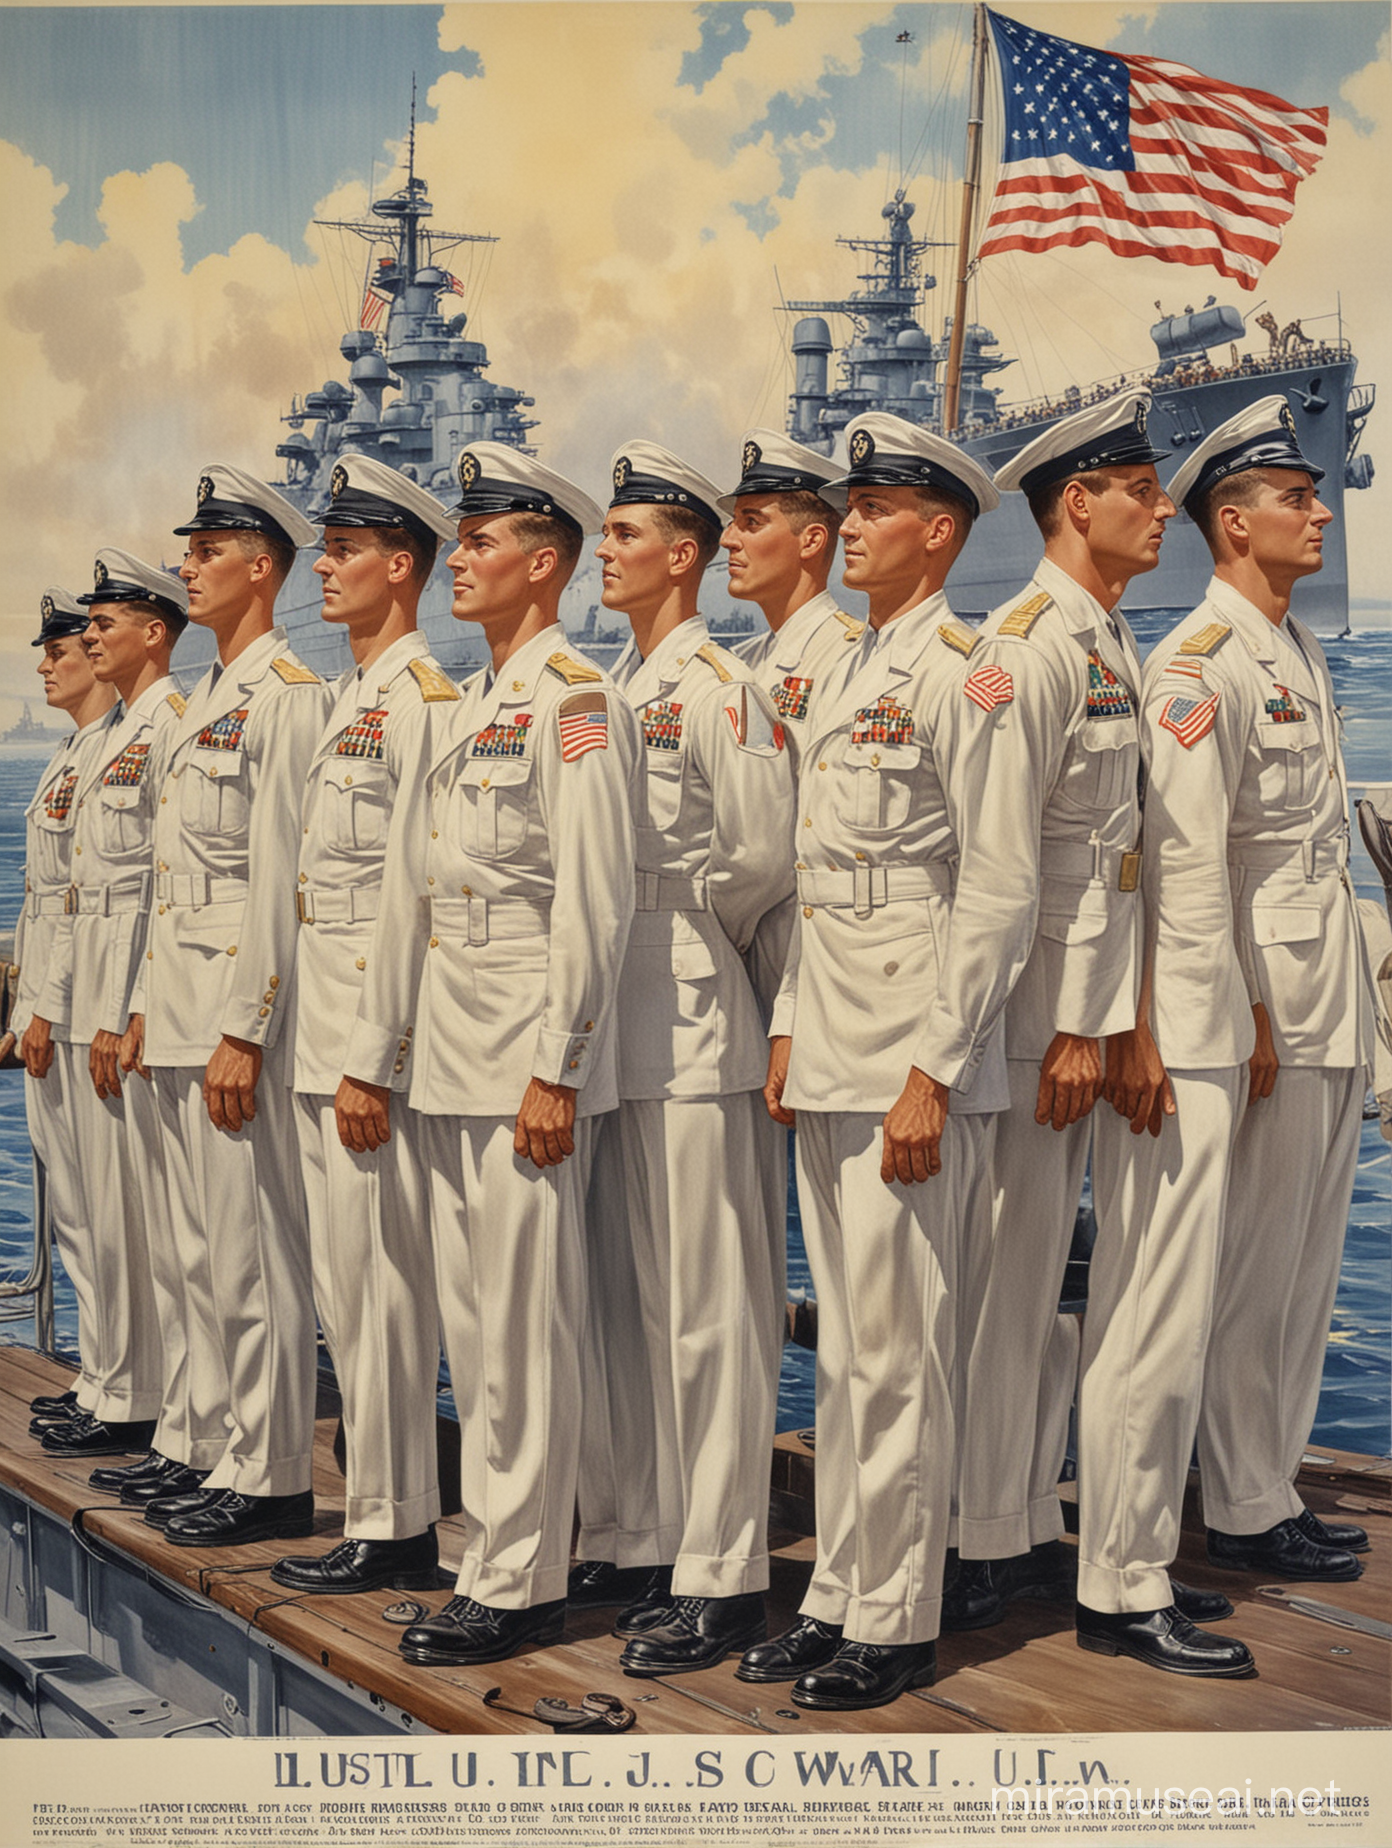 World War Two era U.S. Navy recruitment poster. It features sailors standing at attention on the deck of a World War Two era battleship and other patriotic imagery. 